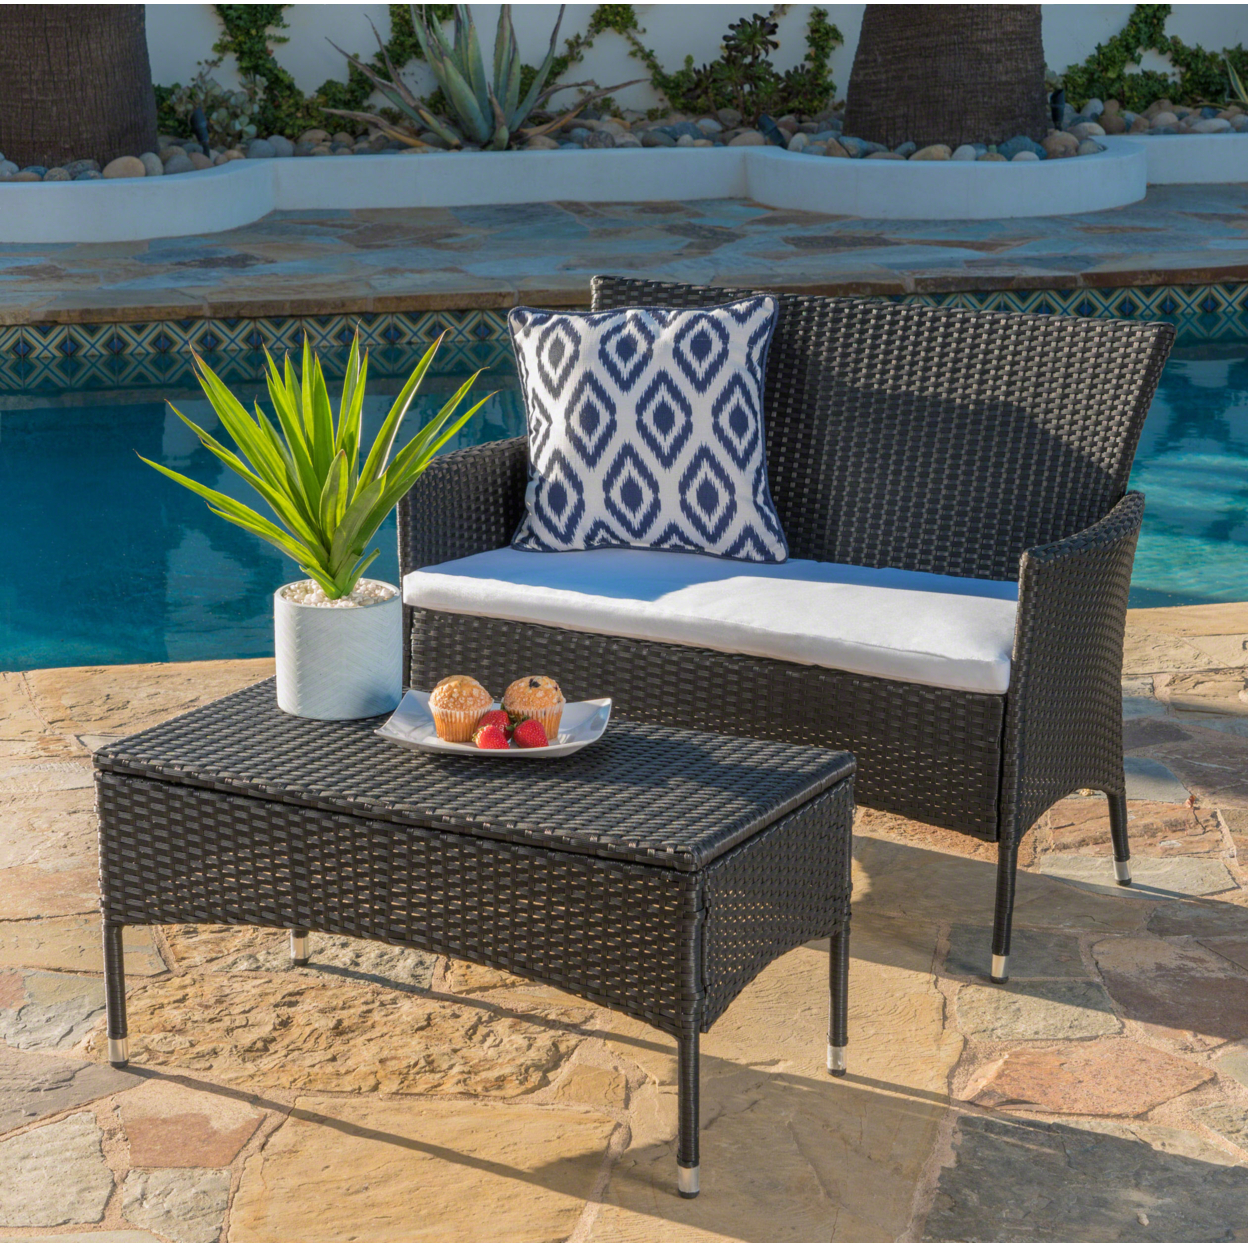 Montague Outdoor Wicker Loveseat And Coffee Table Set - Grey / Teal